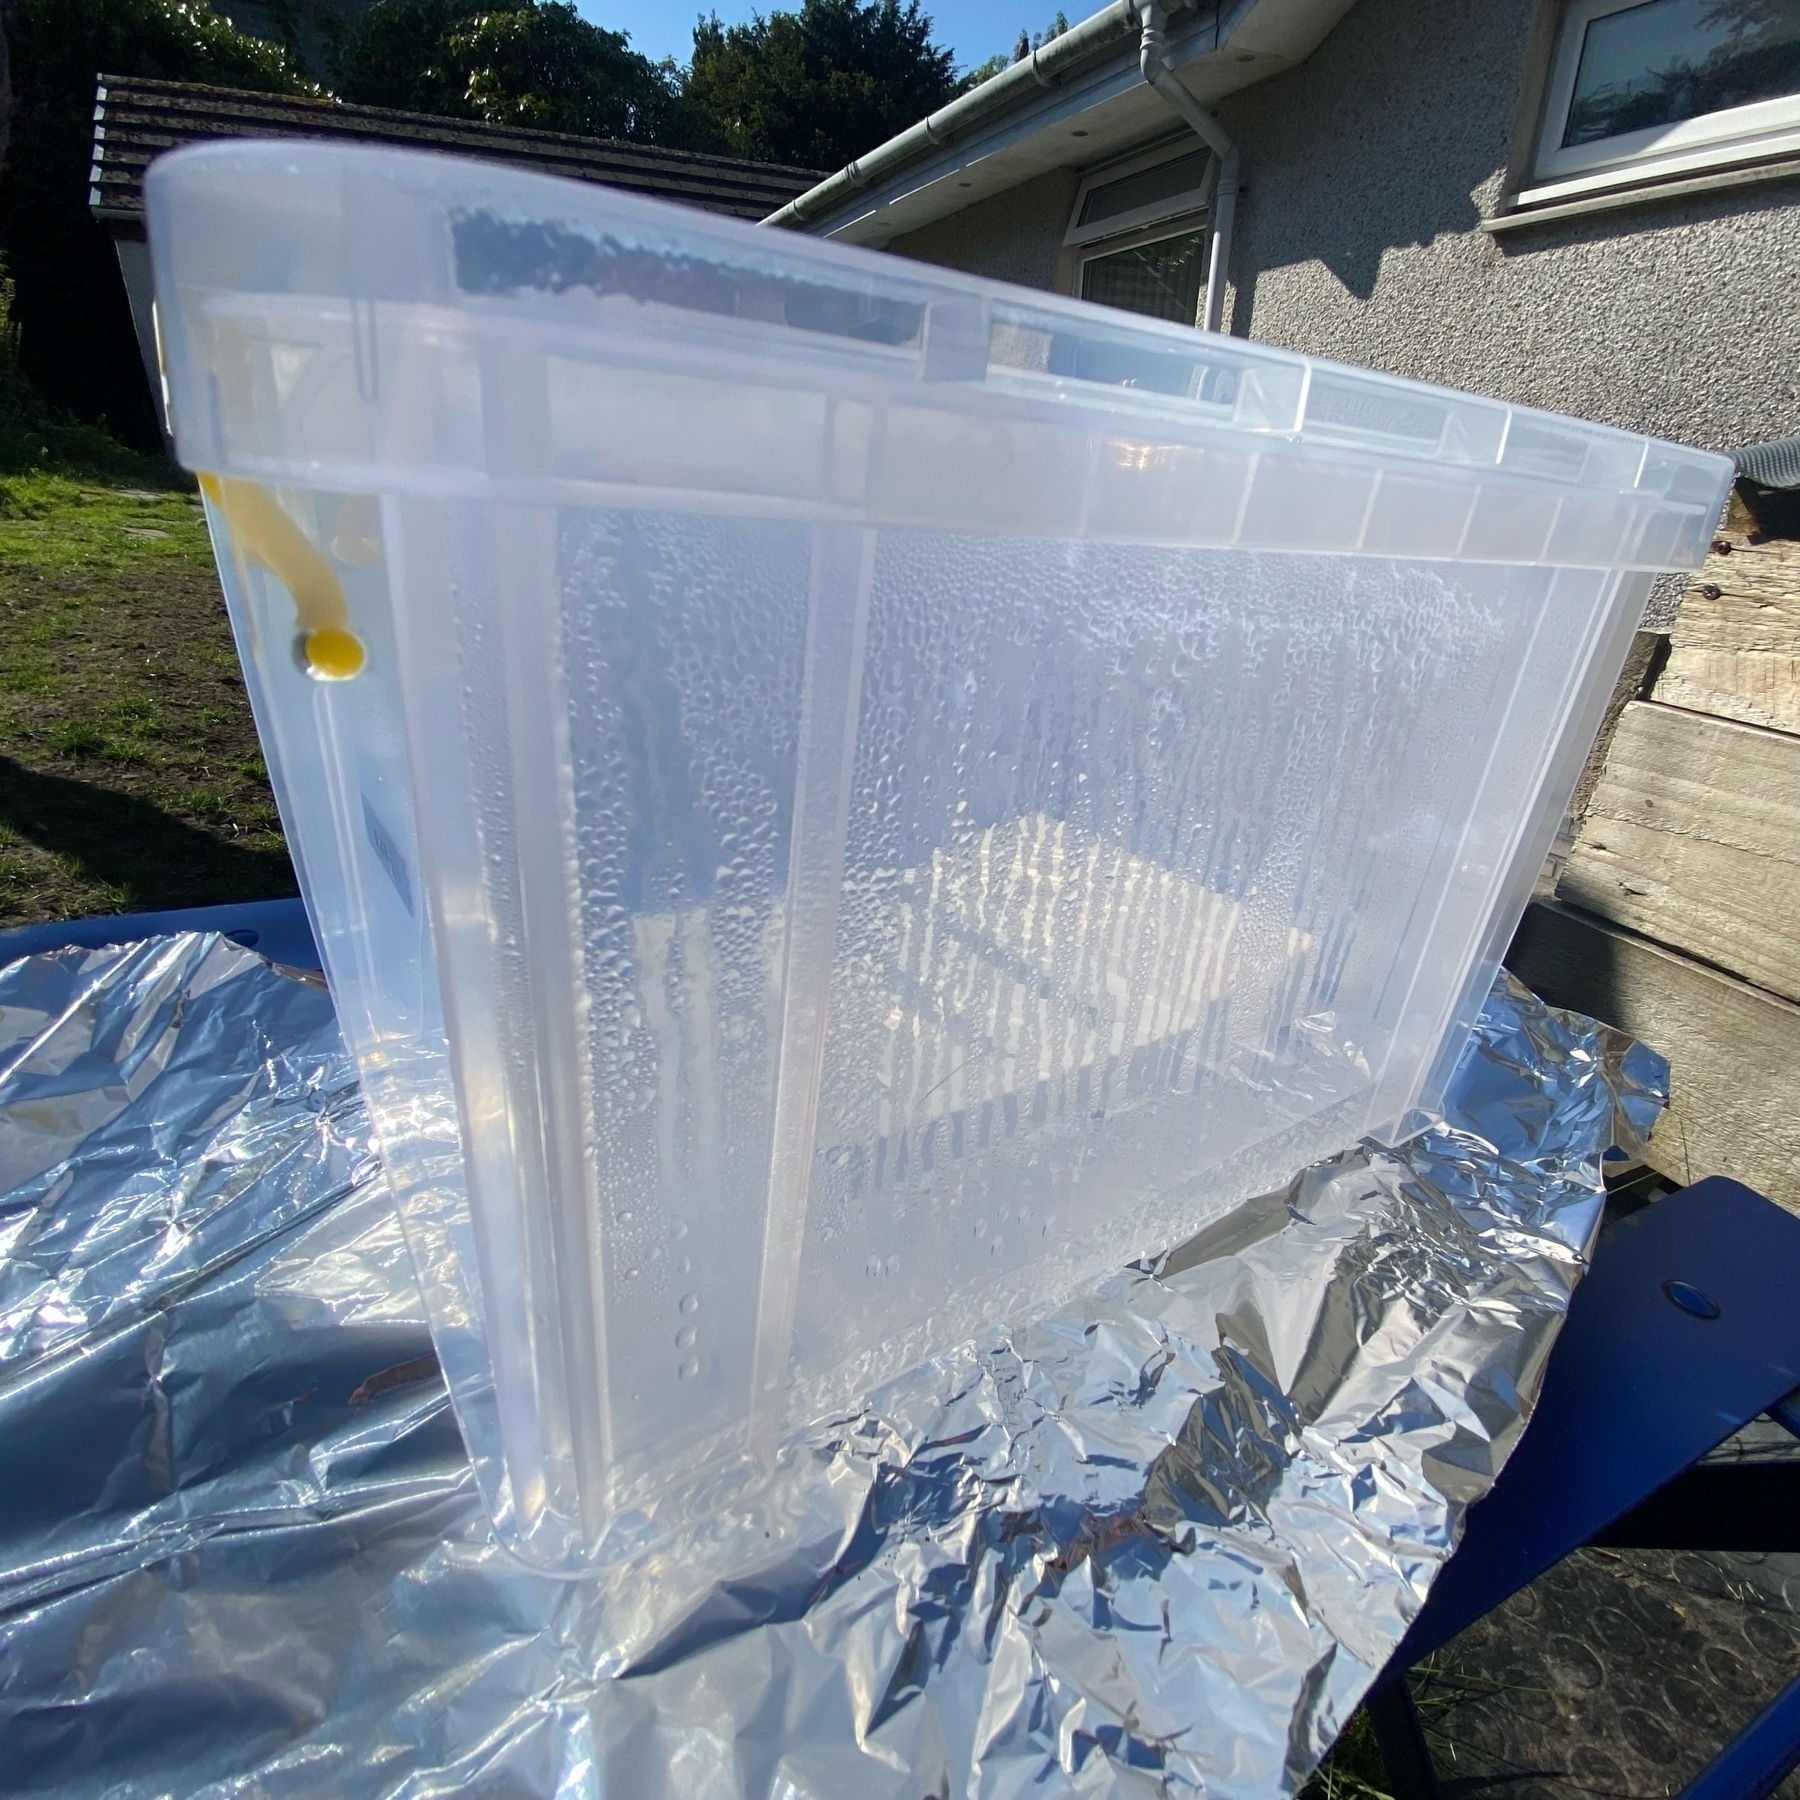 a clear Perspex™ box in direct sunlight with a white plastic item inside. aluminium foil underneath, the clear liquid in the box is forming condensation on the walls and lid